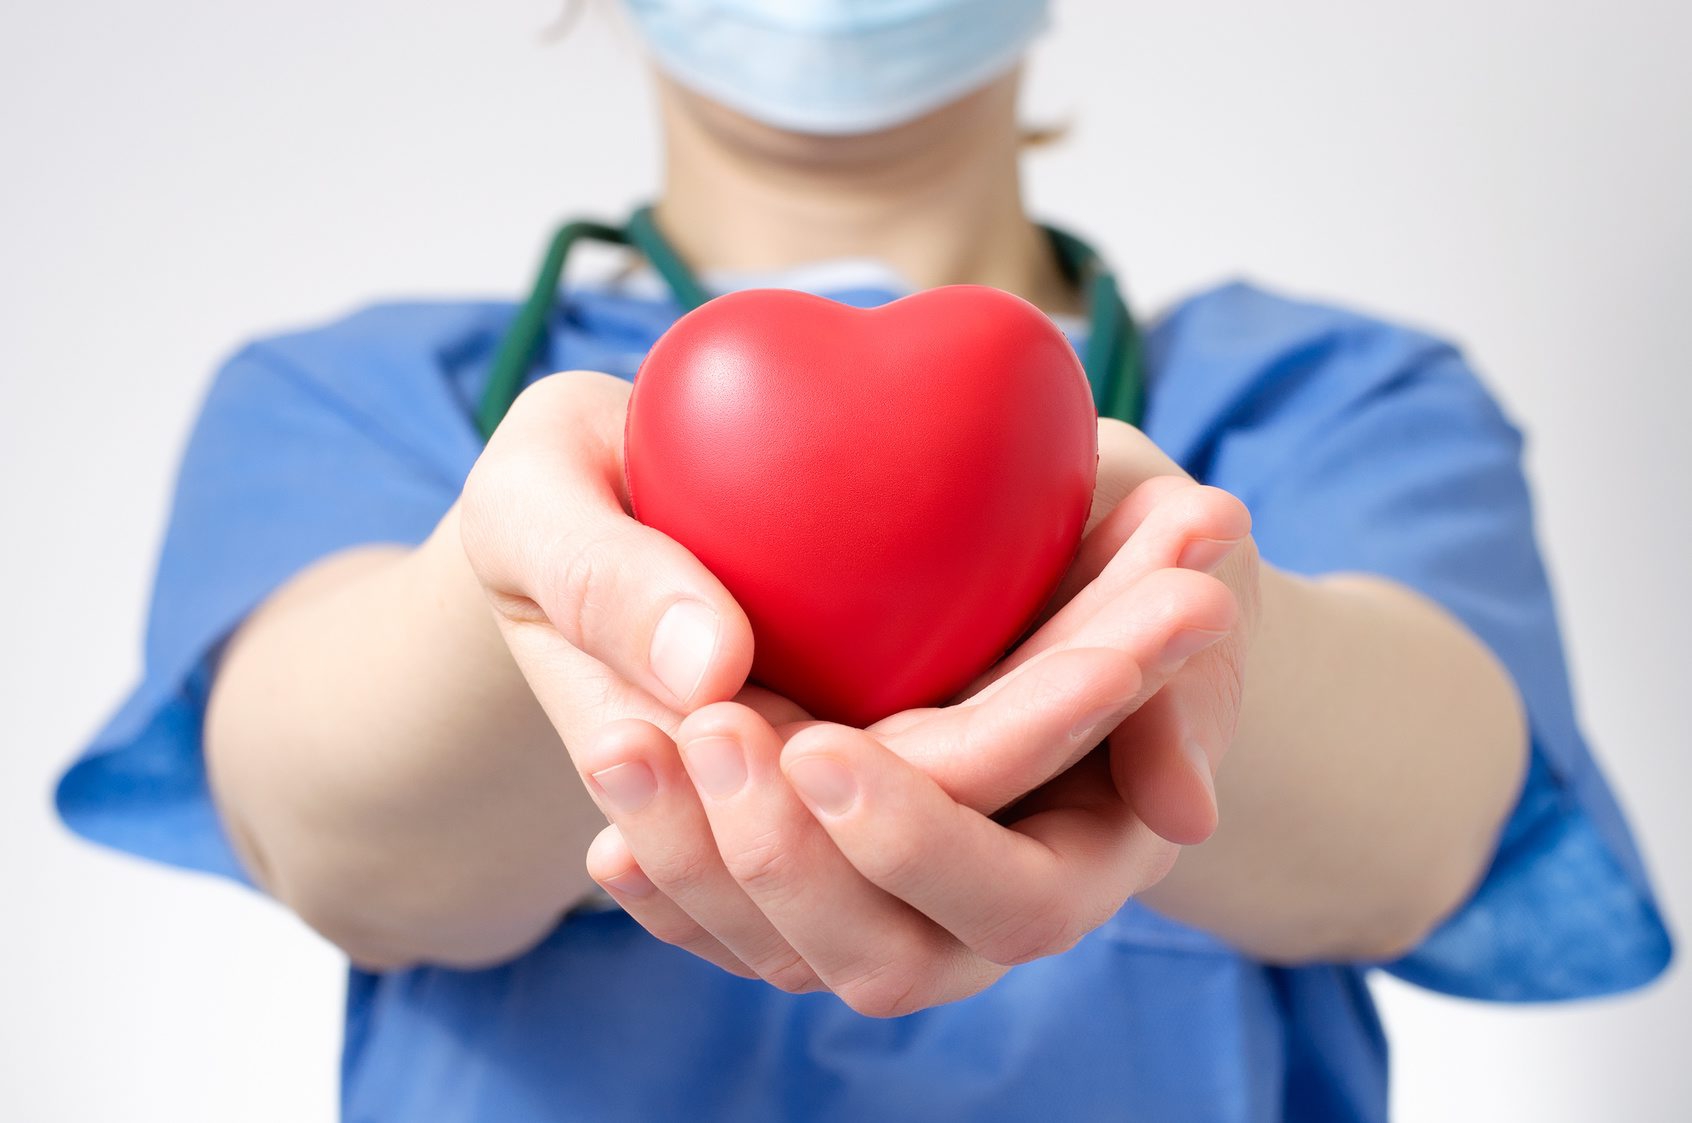 Female doctor holding a red heart shape Doctor holding a heart